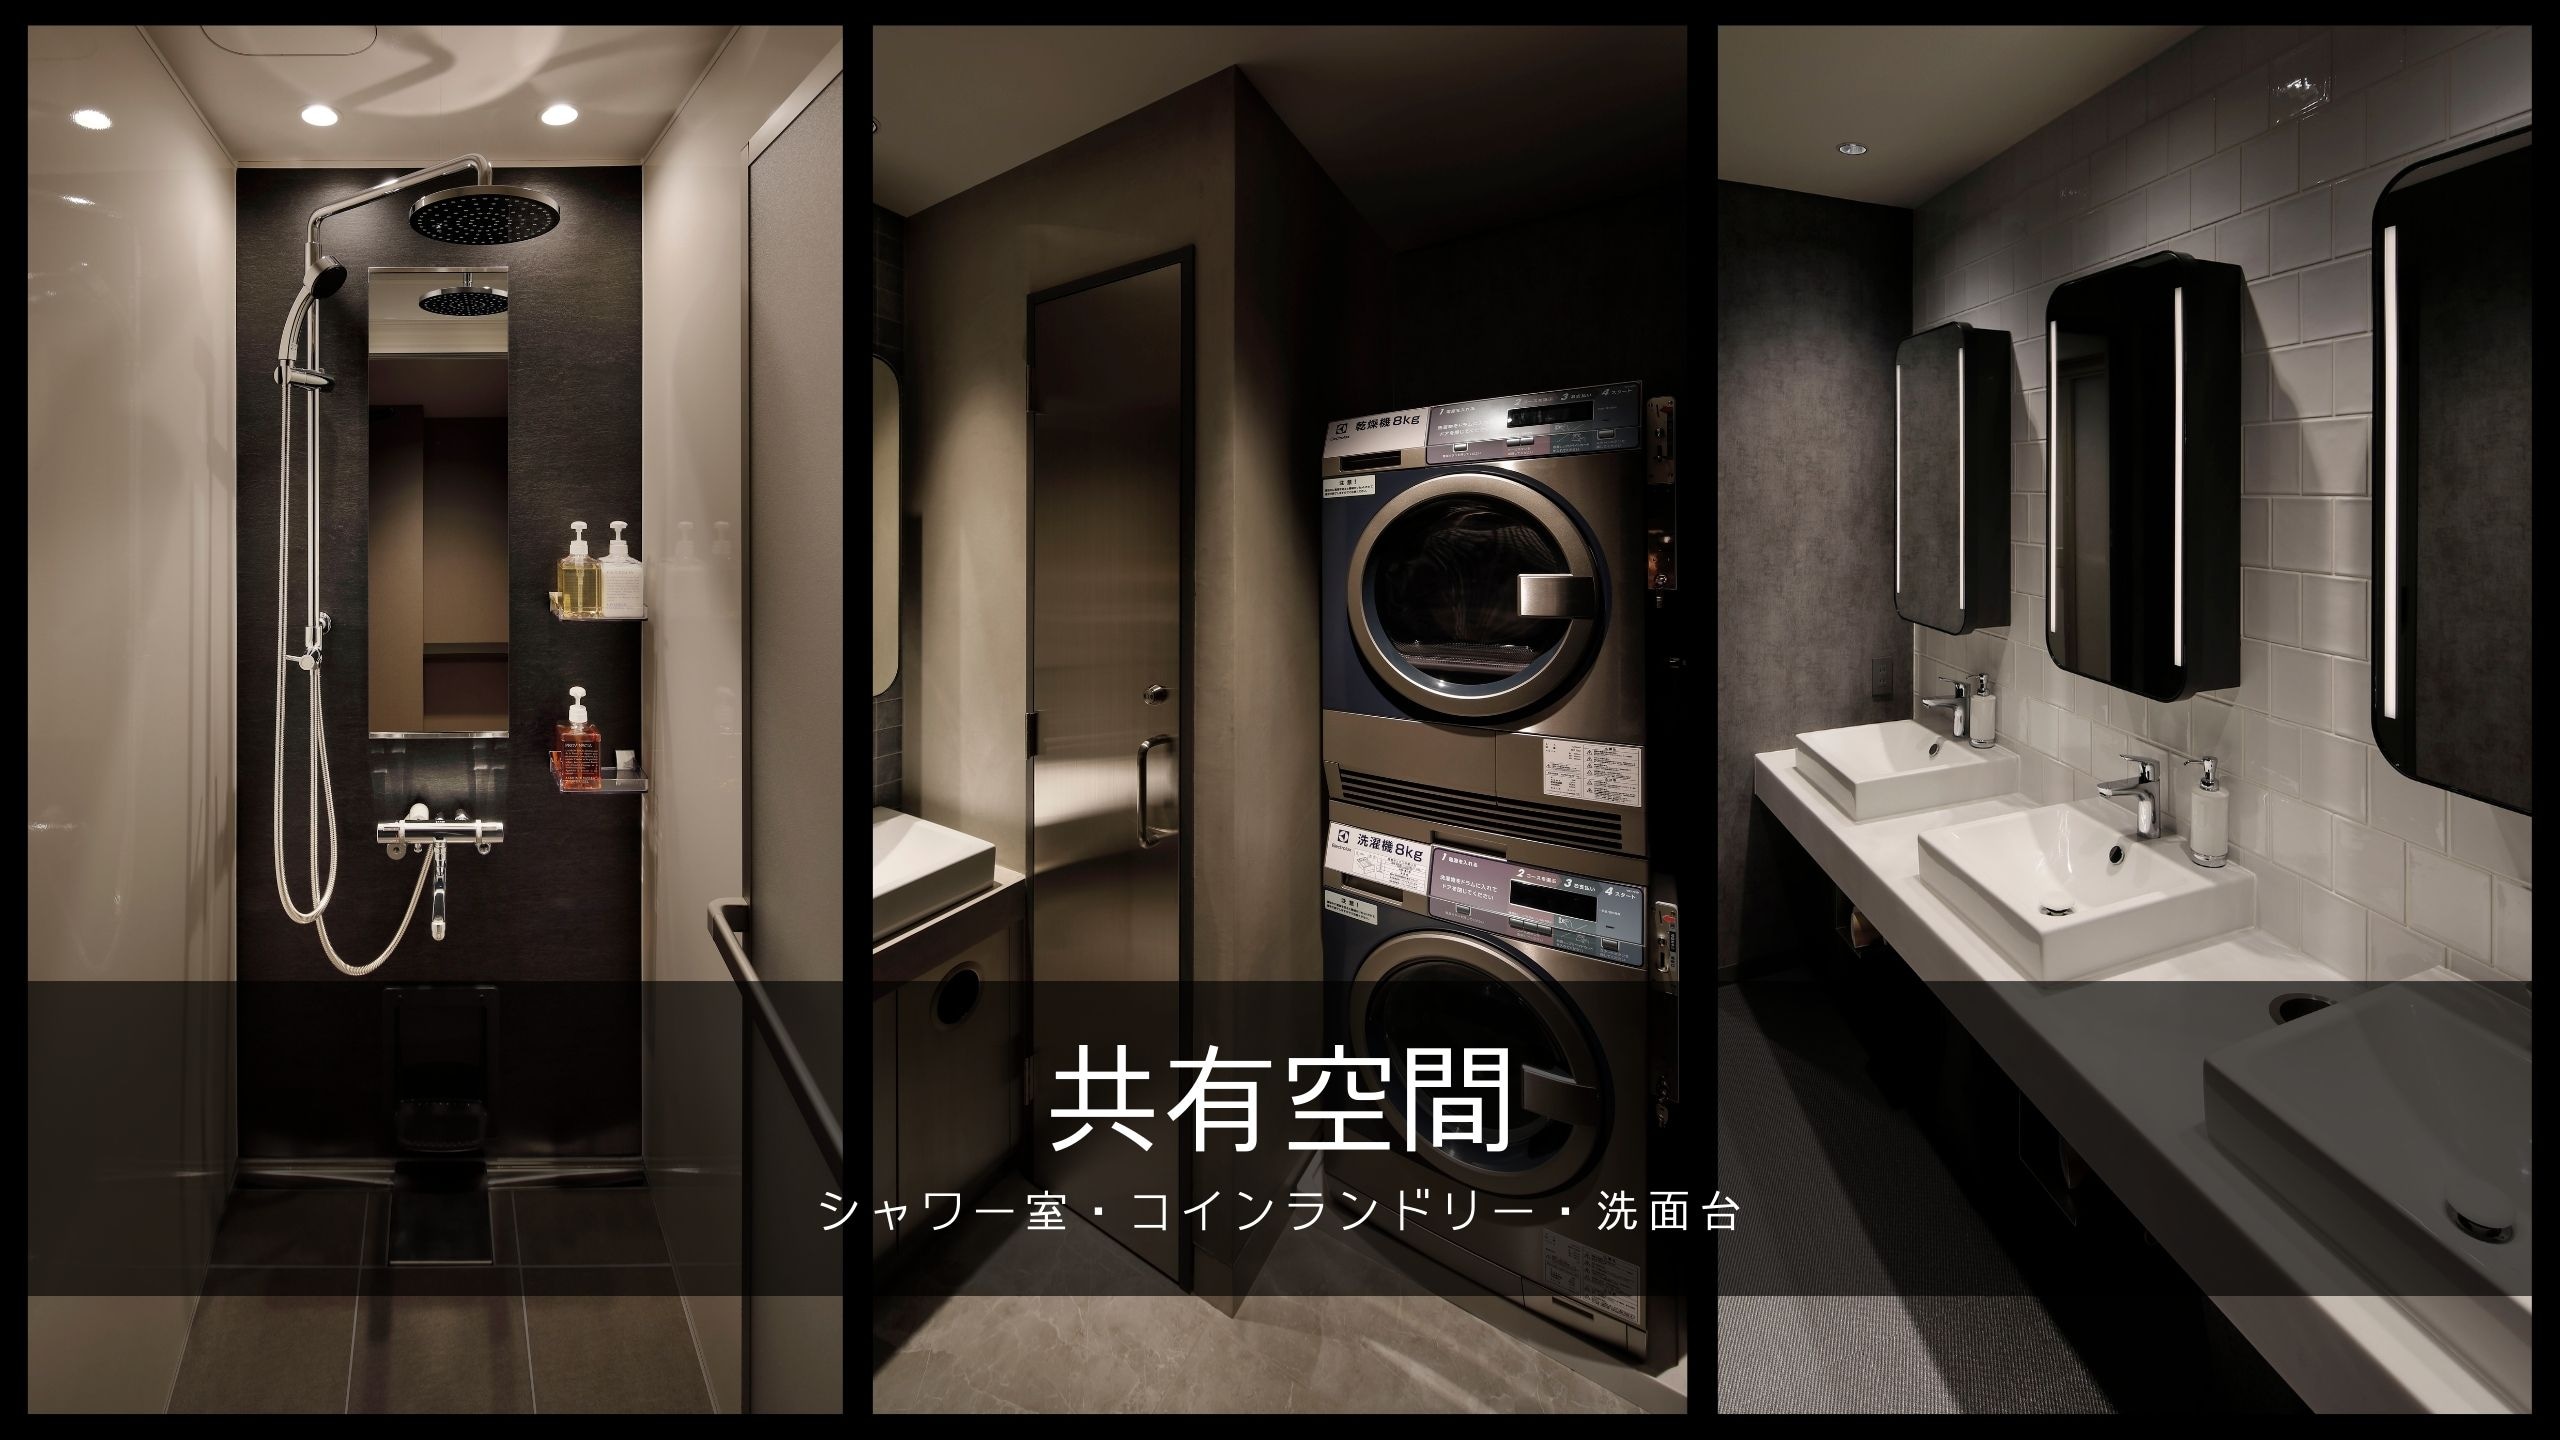 Shared space, shower room, coin laundry, wash basin